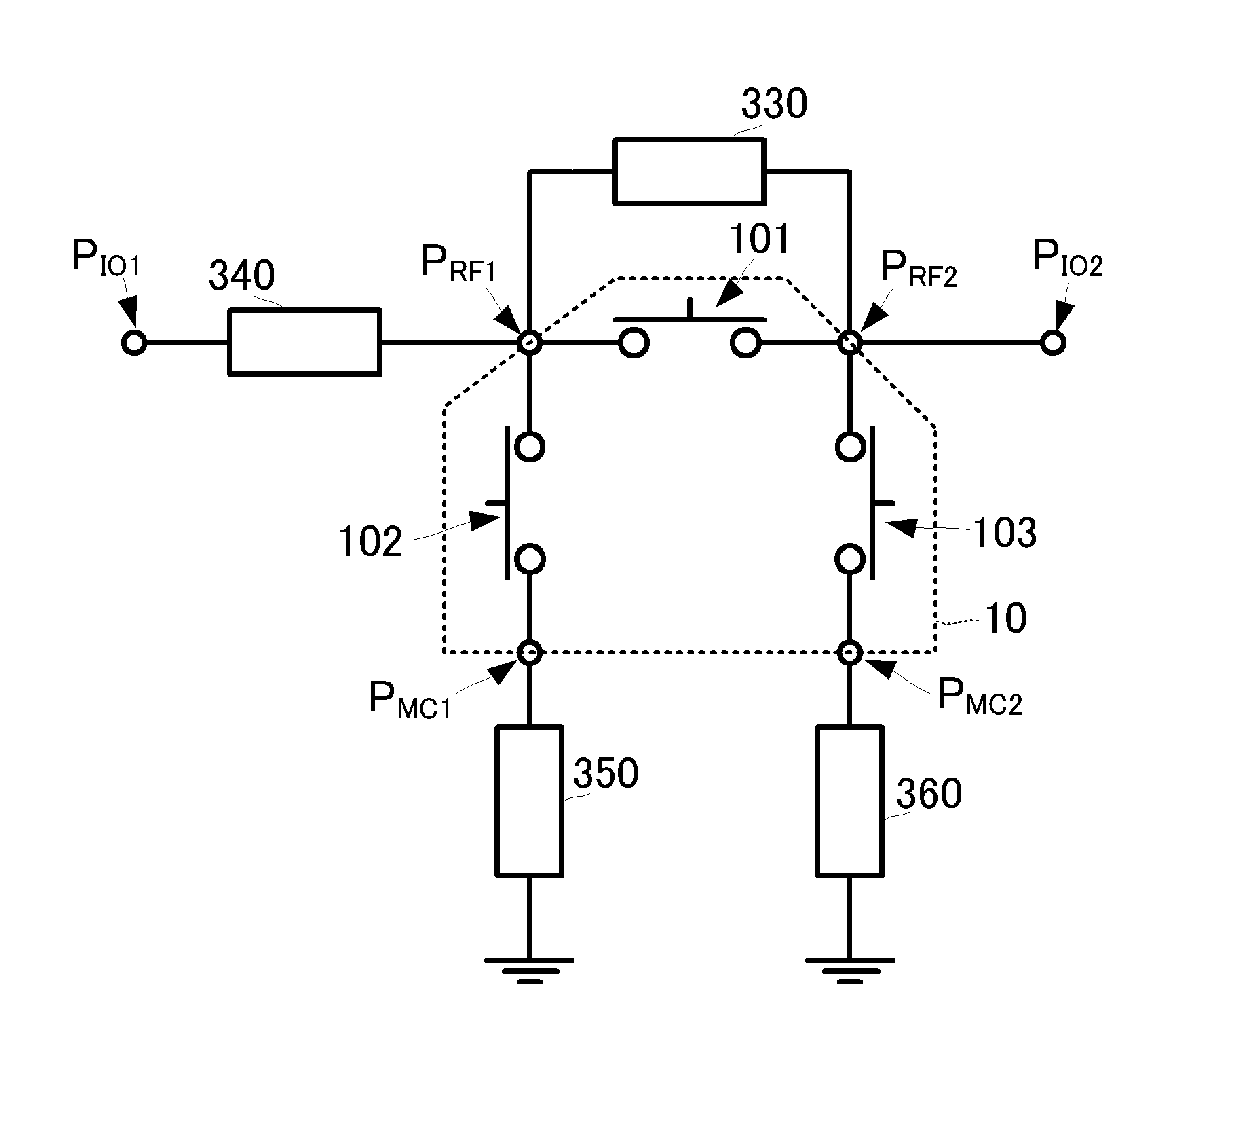 Impedance matching switch circuit, impedance matching switch circuit module, and impedance matching circuit module